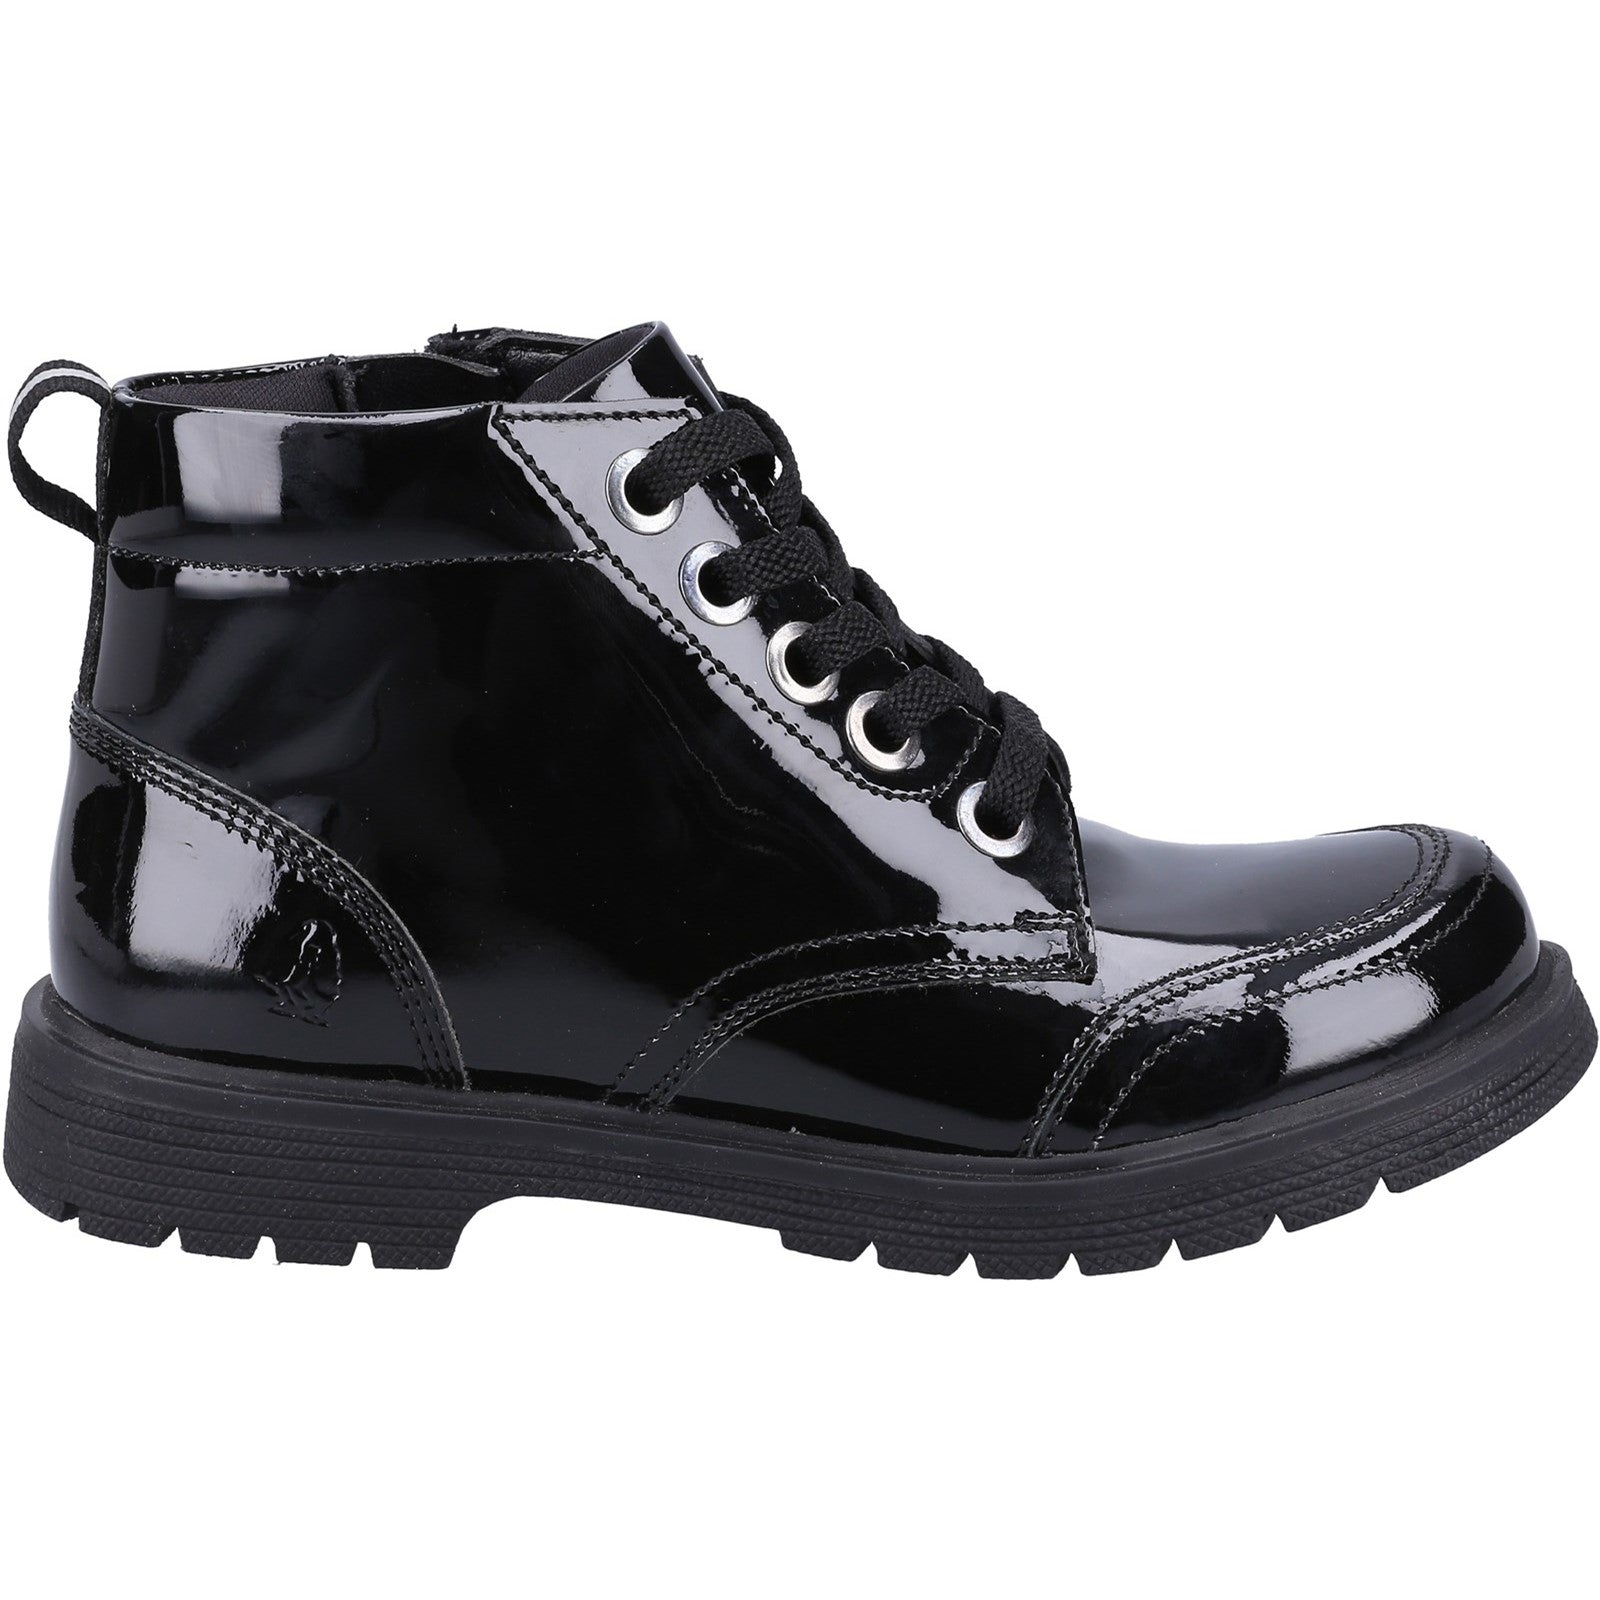 Hush Puppies Girls Jolie Patent Leather Boots - Black